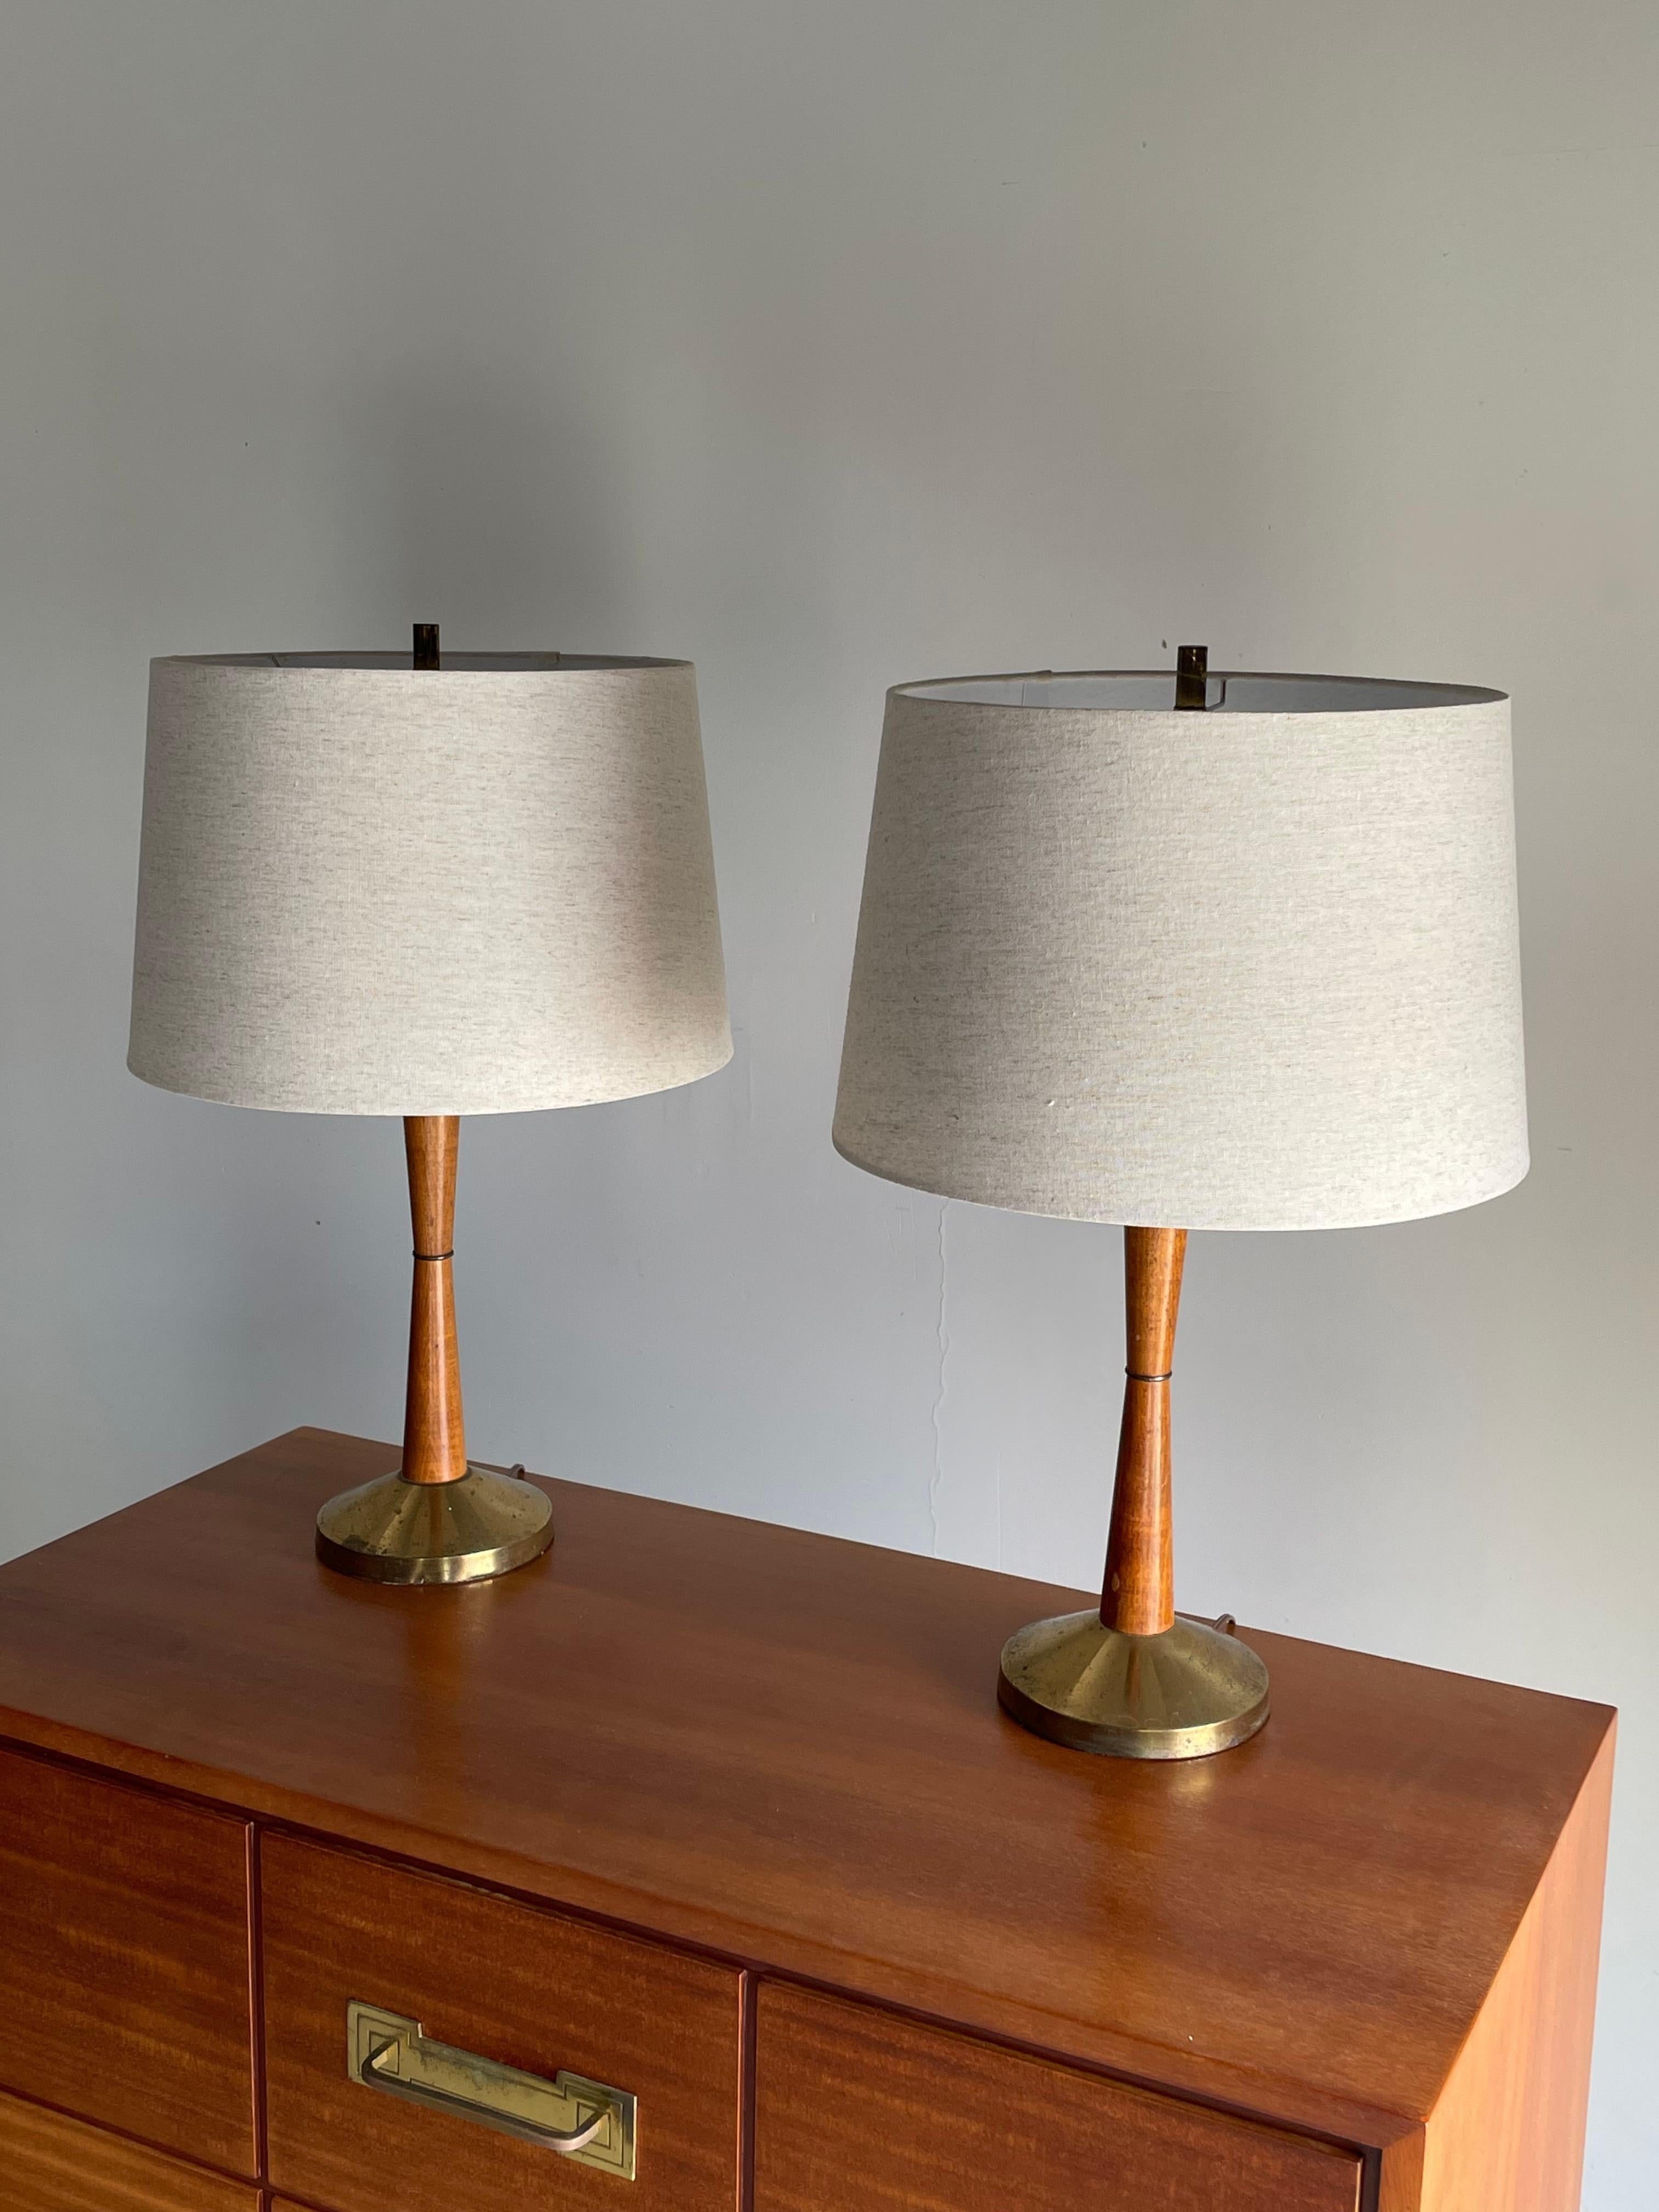 Iconic Mid-Century Modern table lamps. Features a brass base and walnut hour glass shape. Other lamp makers from the period include Modeline, Yasha Heifetz, and Paul McCobb.

Overall:
24” tall
15” wide

14” tall to top of wood
6” base.